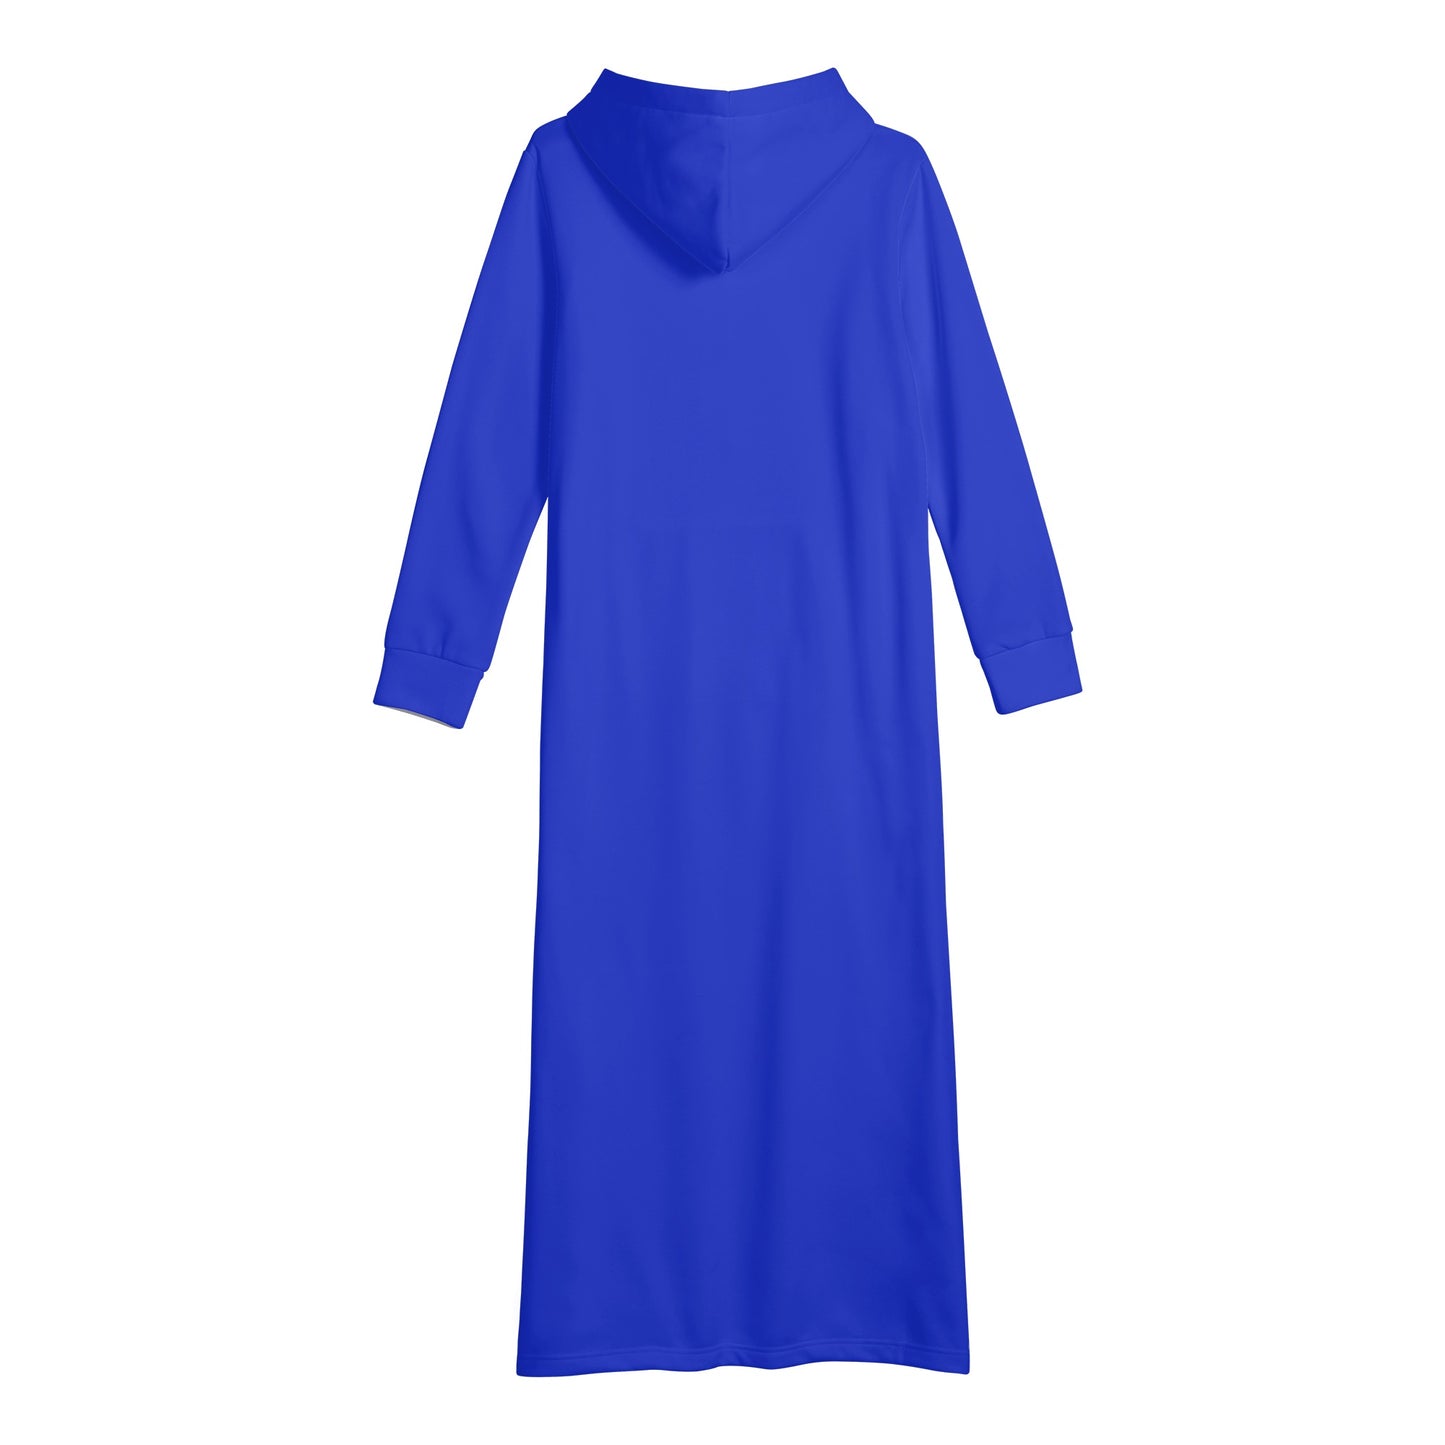 T4x Blue Womens Cute and Comfortable Long Length Hoodie Dress